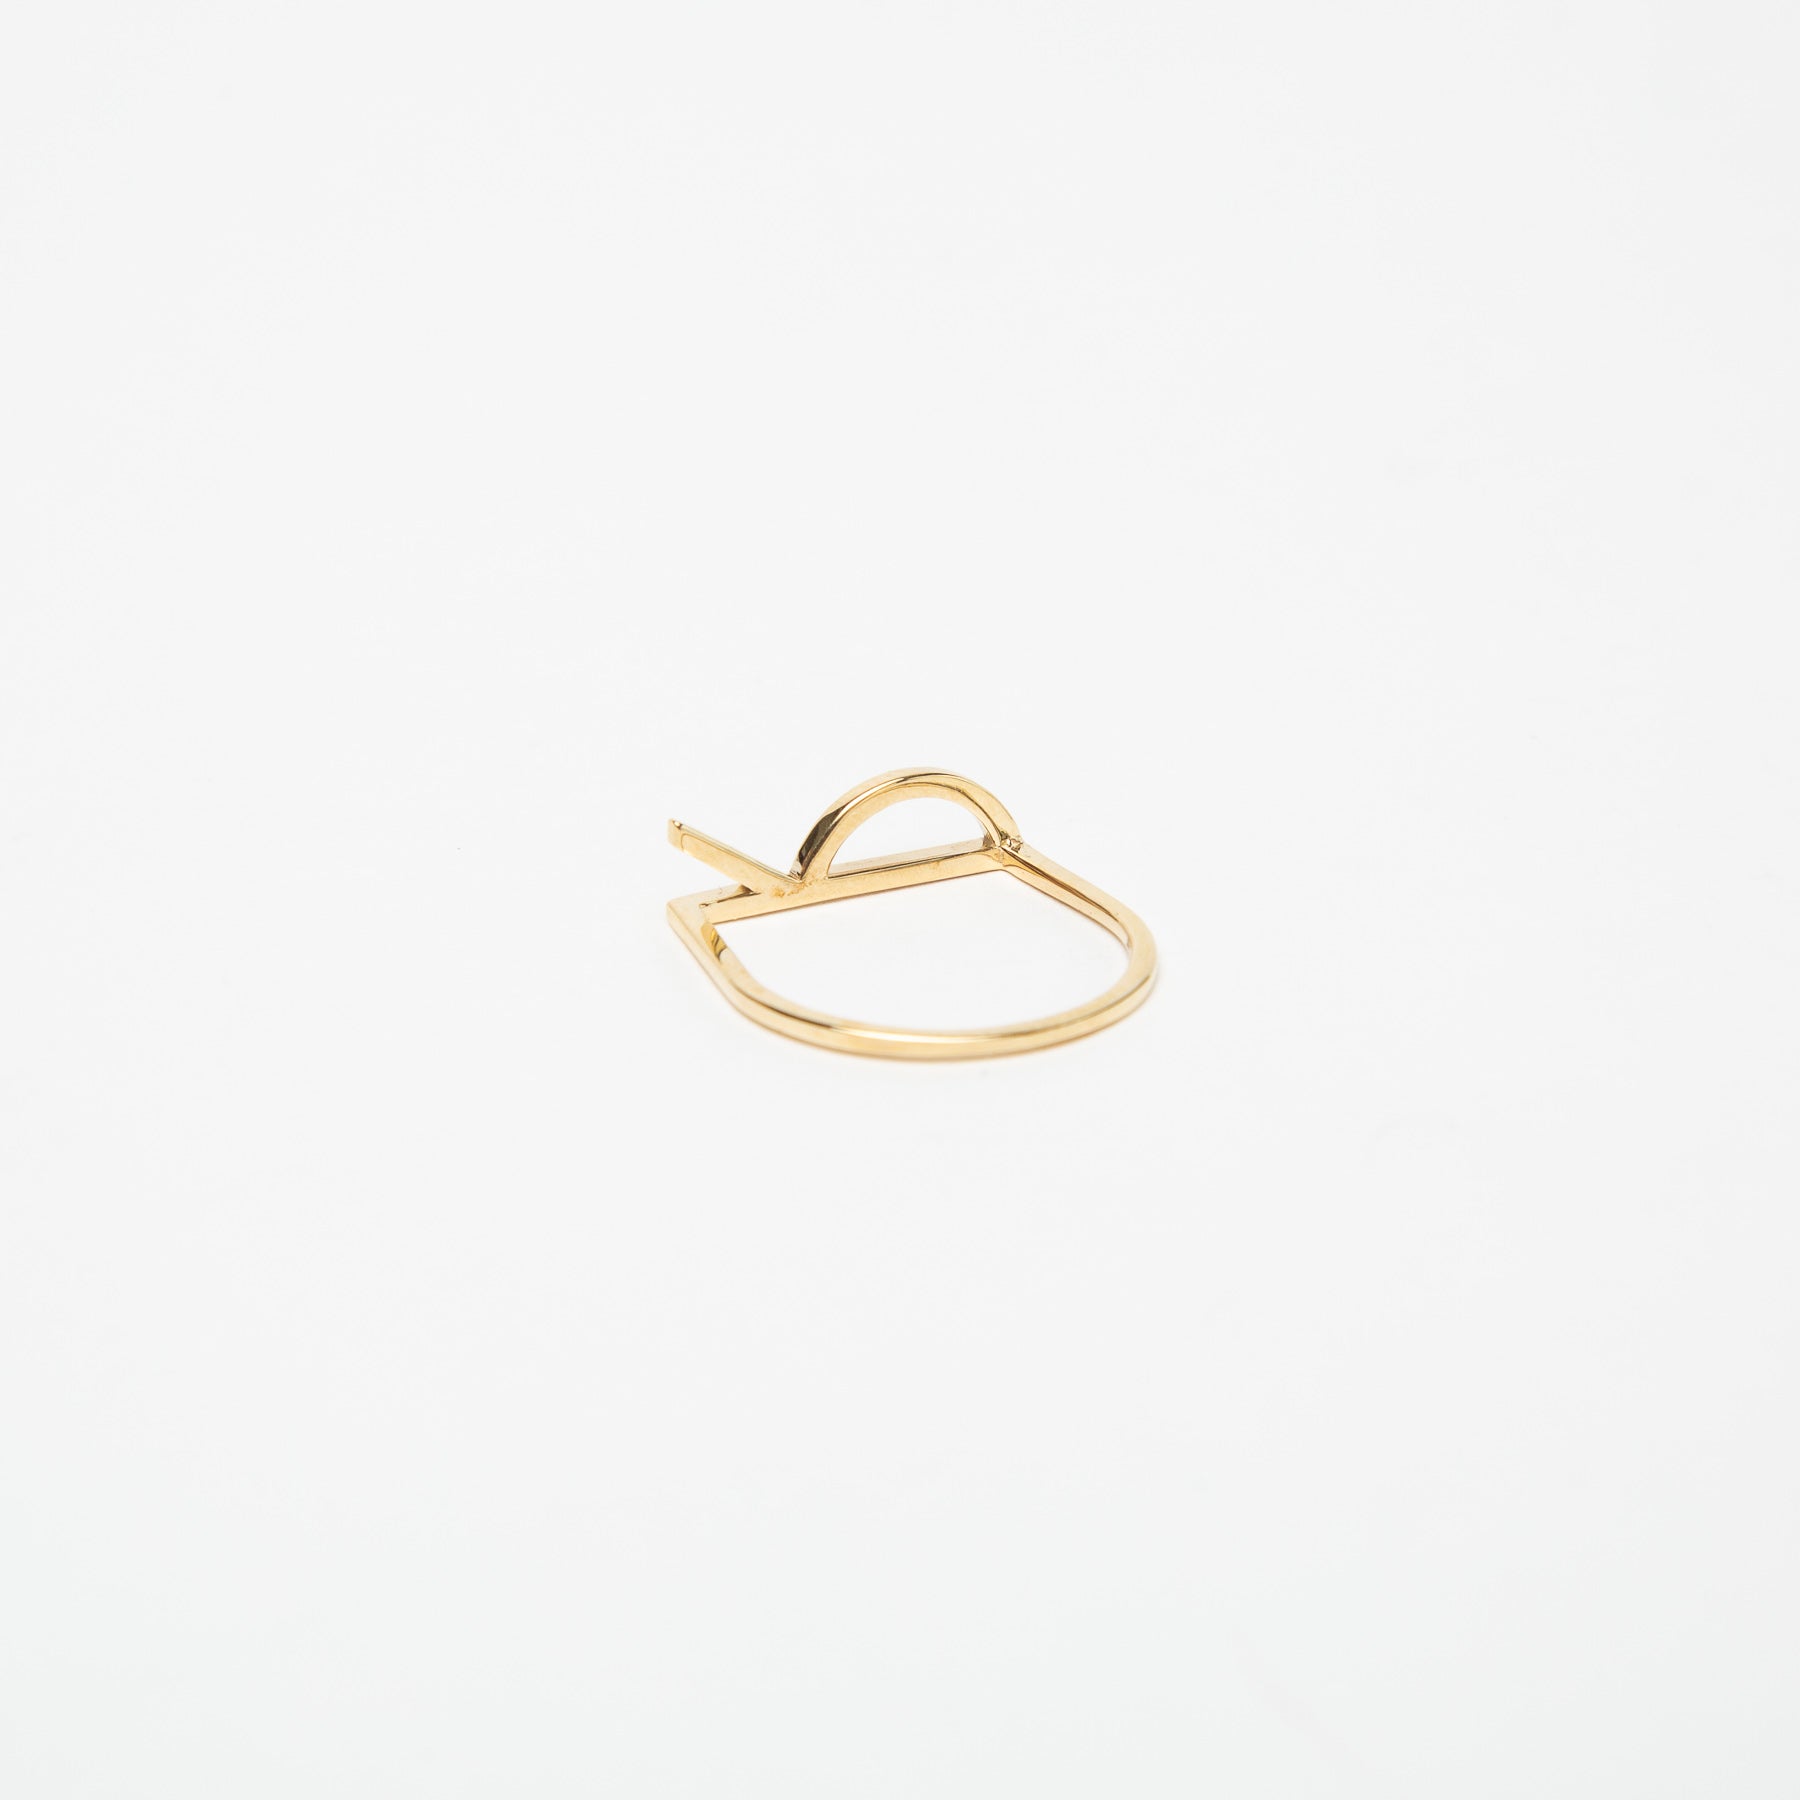 KWIT | 14K YELLOW GOLD LETTER R RING